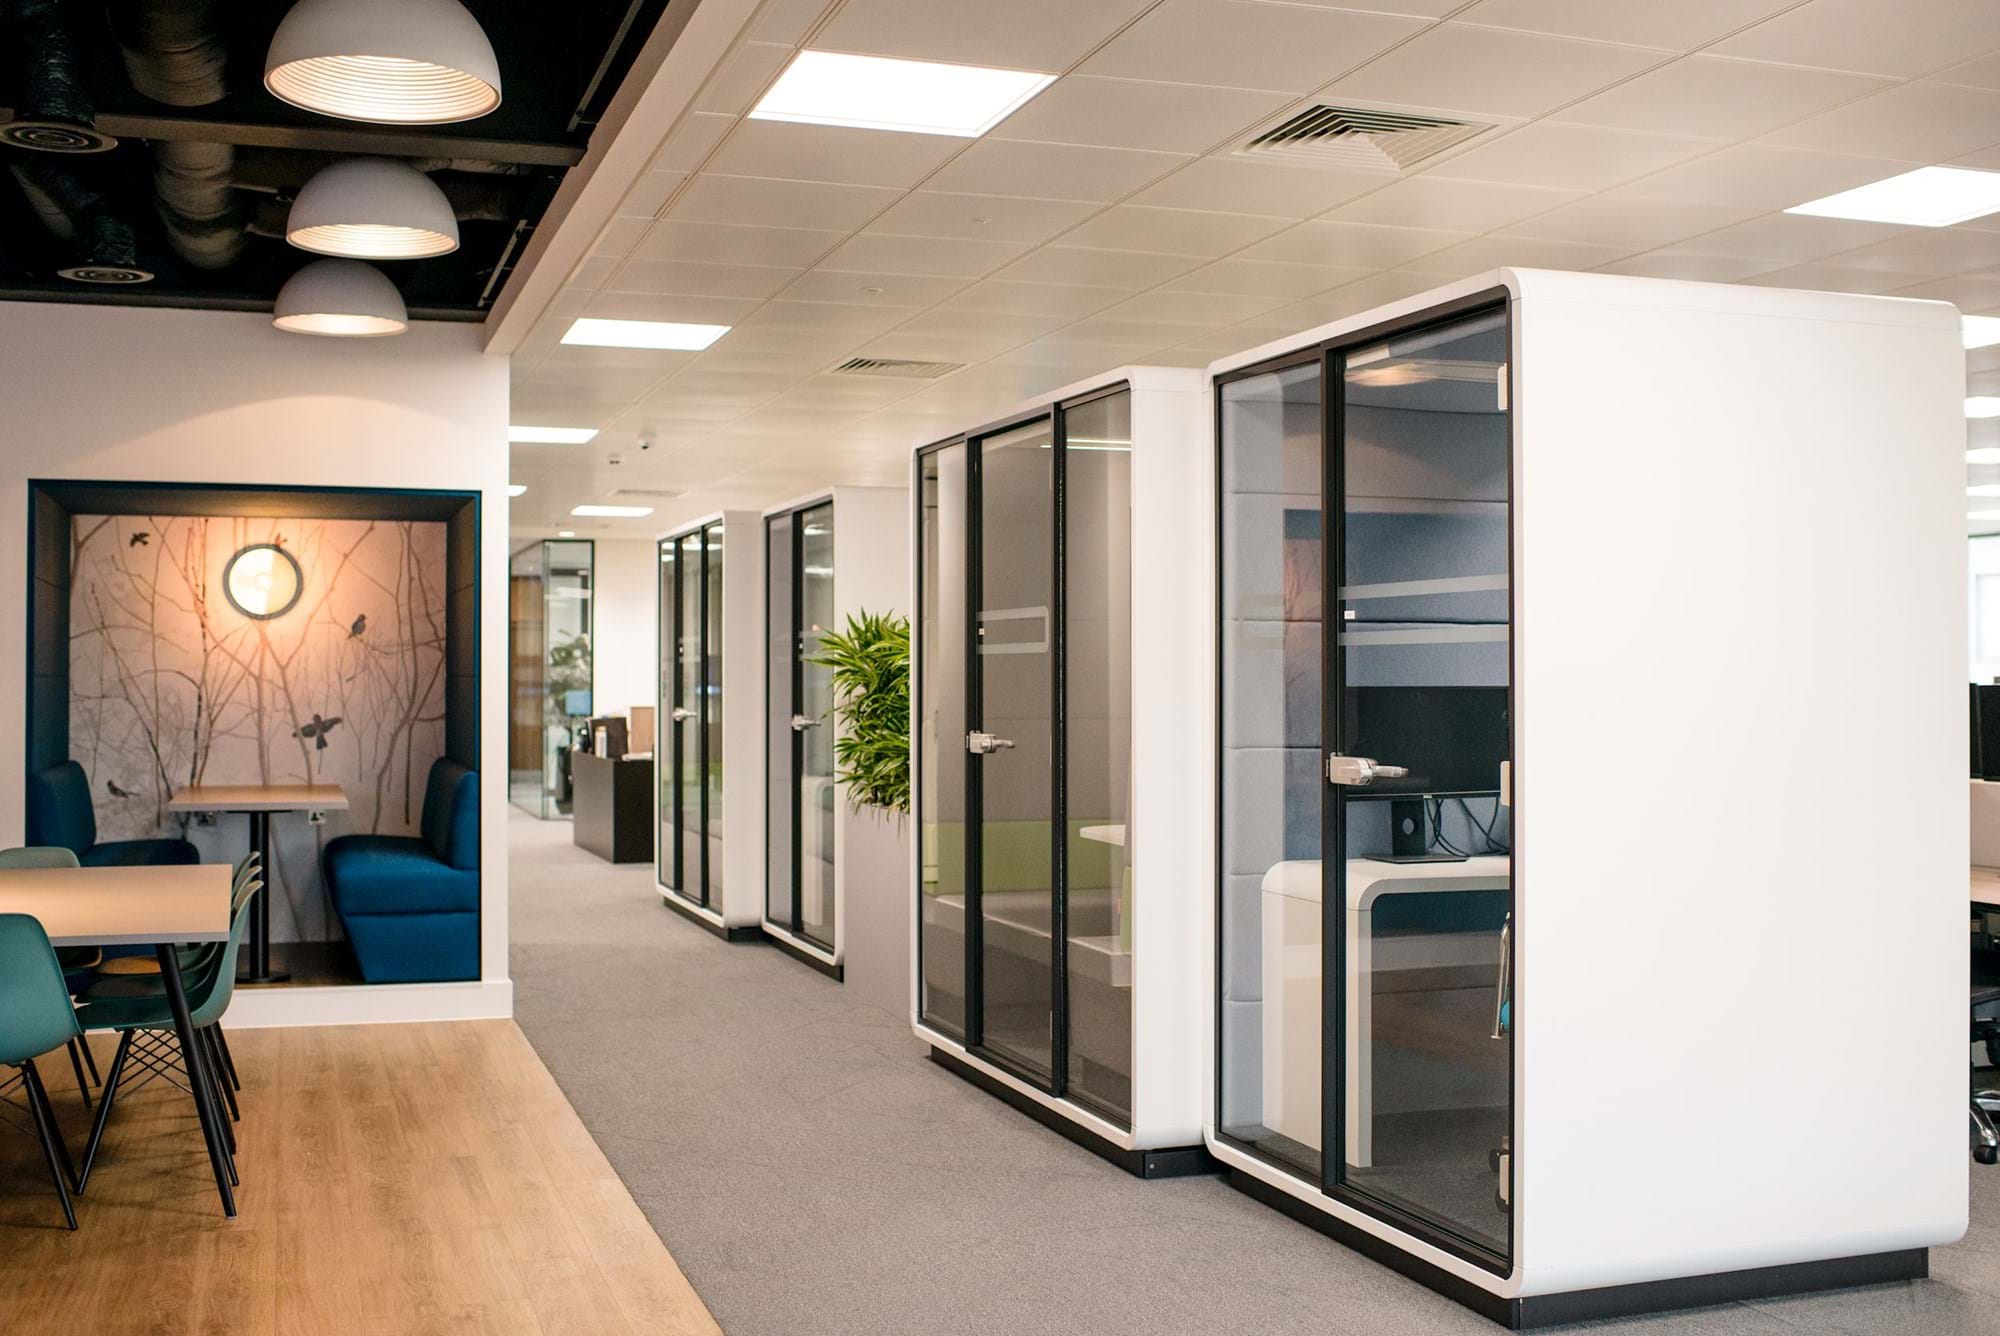 Modus Workspace office design, fit out and refurbishment - Charles River Associates Cambridge - Modus-Charles-Rivers-Associates-Cambridge-30.jpg